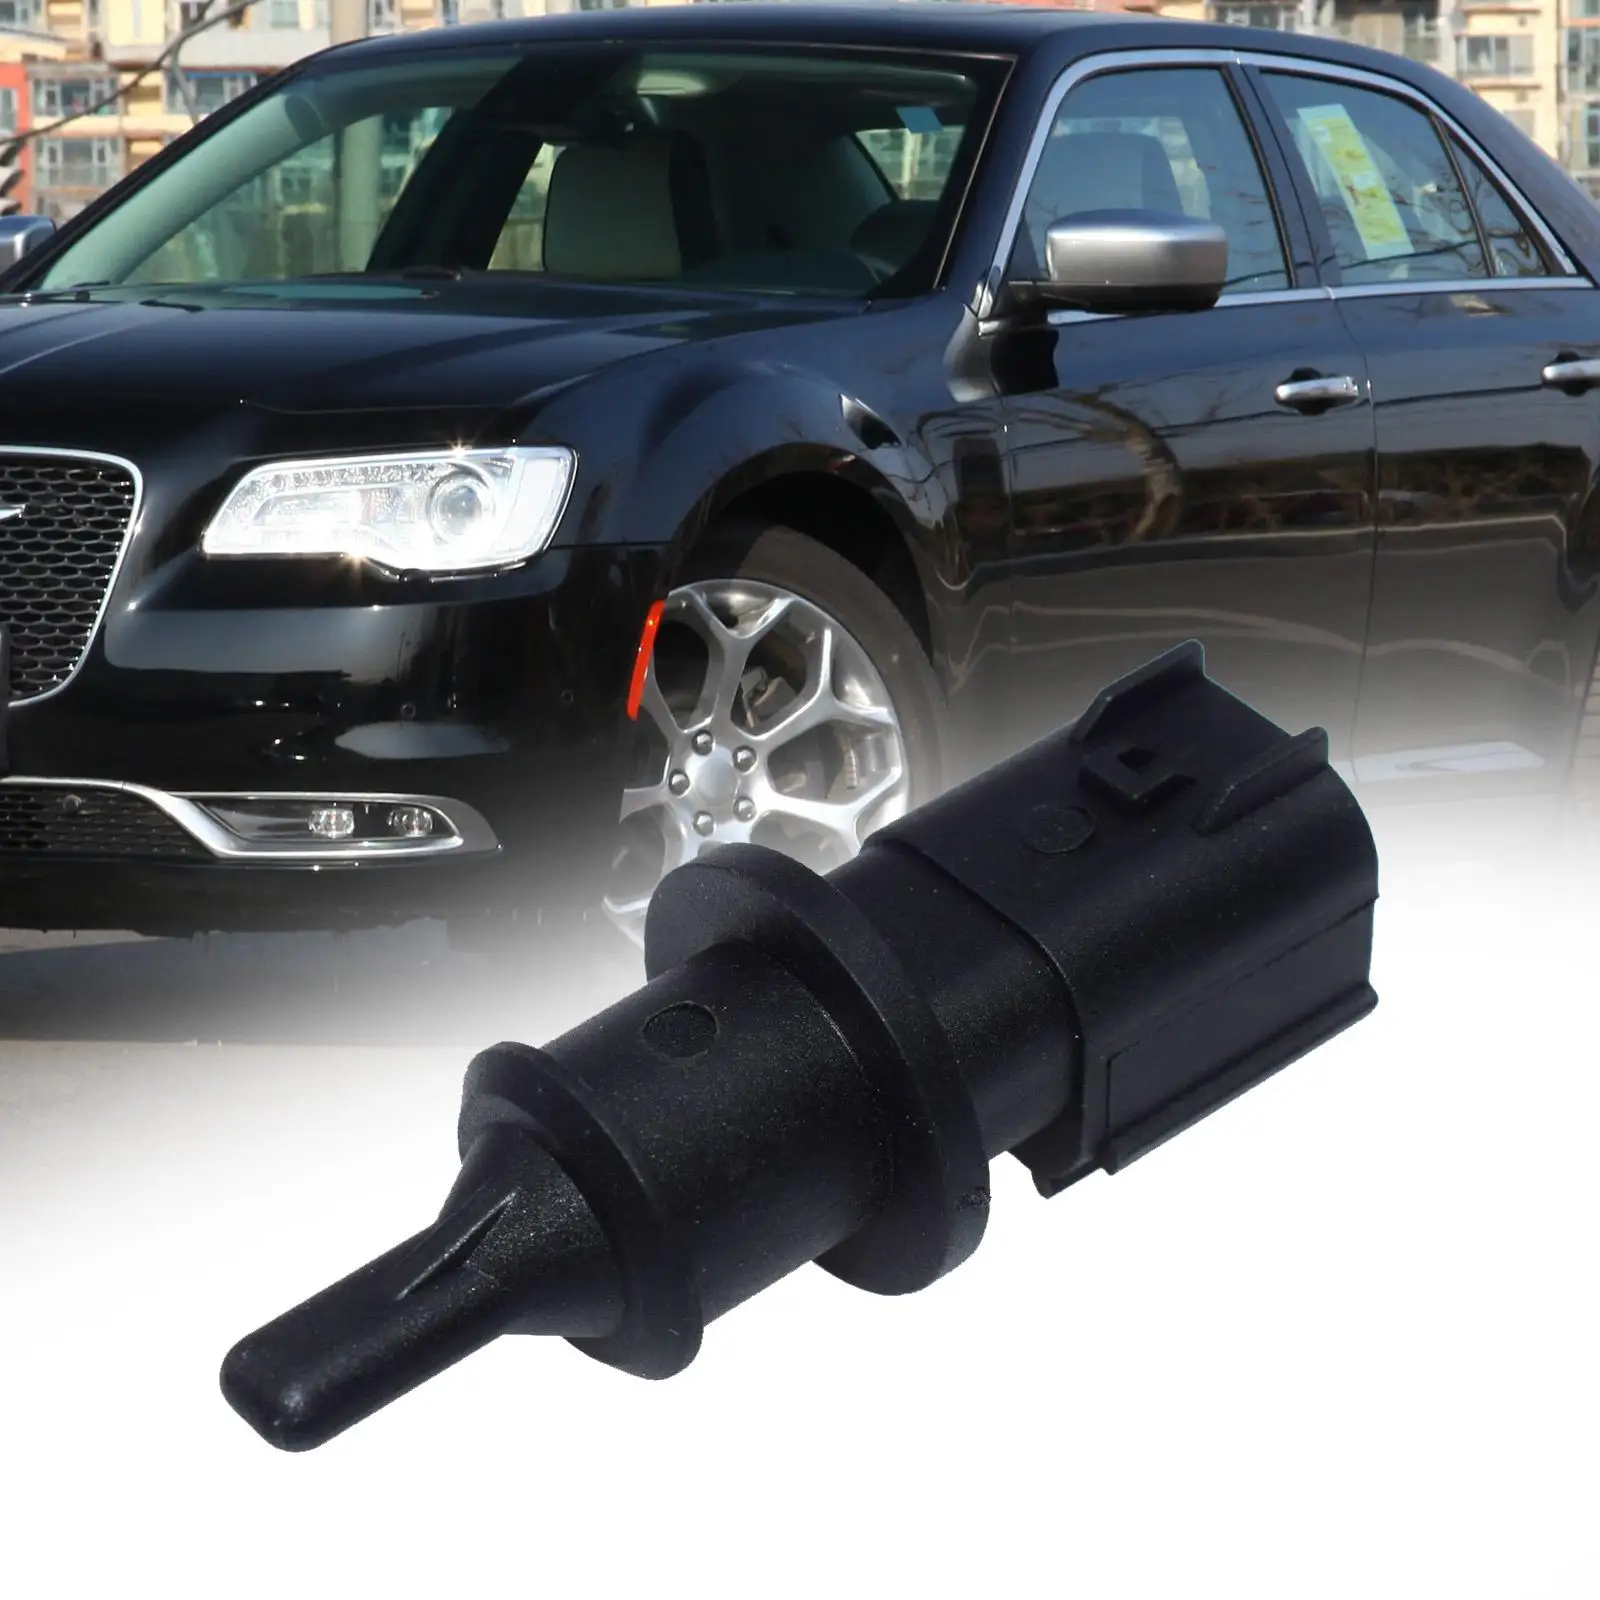 Ambient Air Temperature Sensor 5293138 Easy Installation High Quality Directly Replace for Chrysler Sebring 200 Accessory